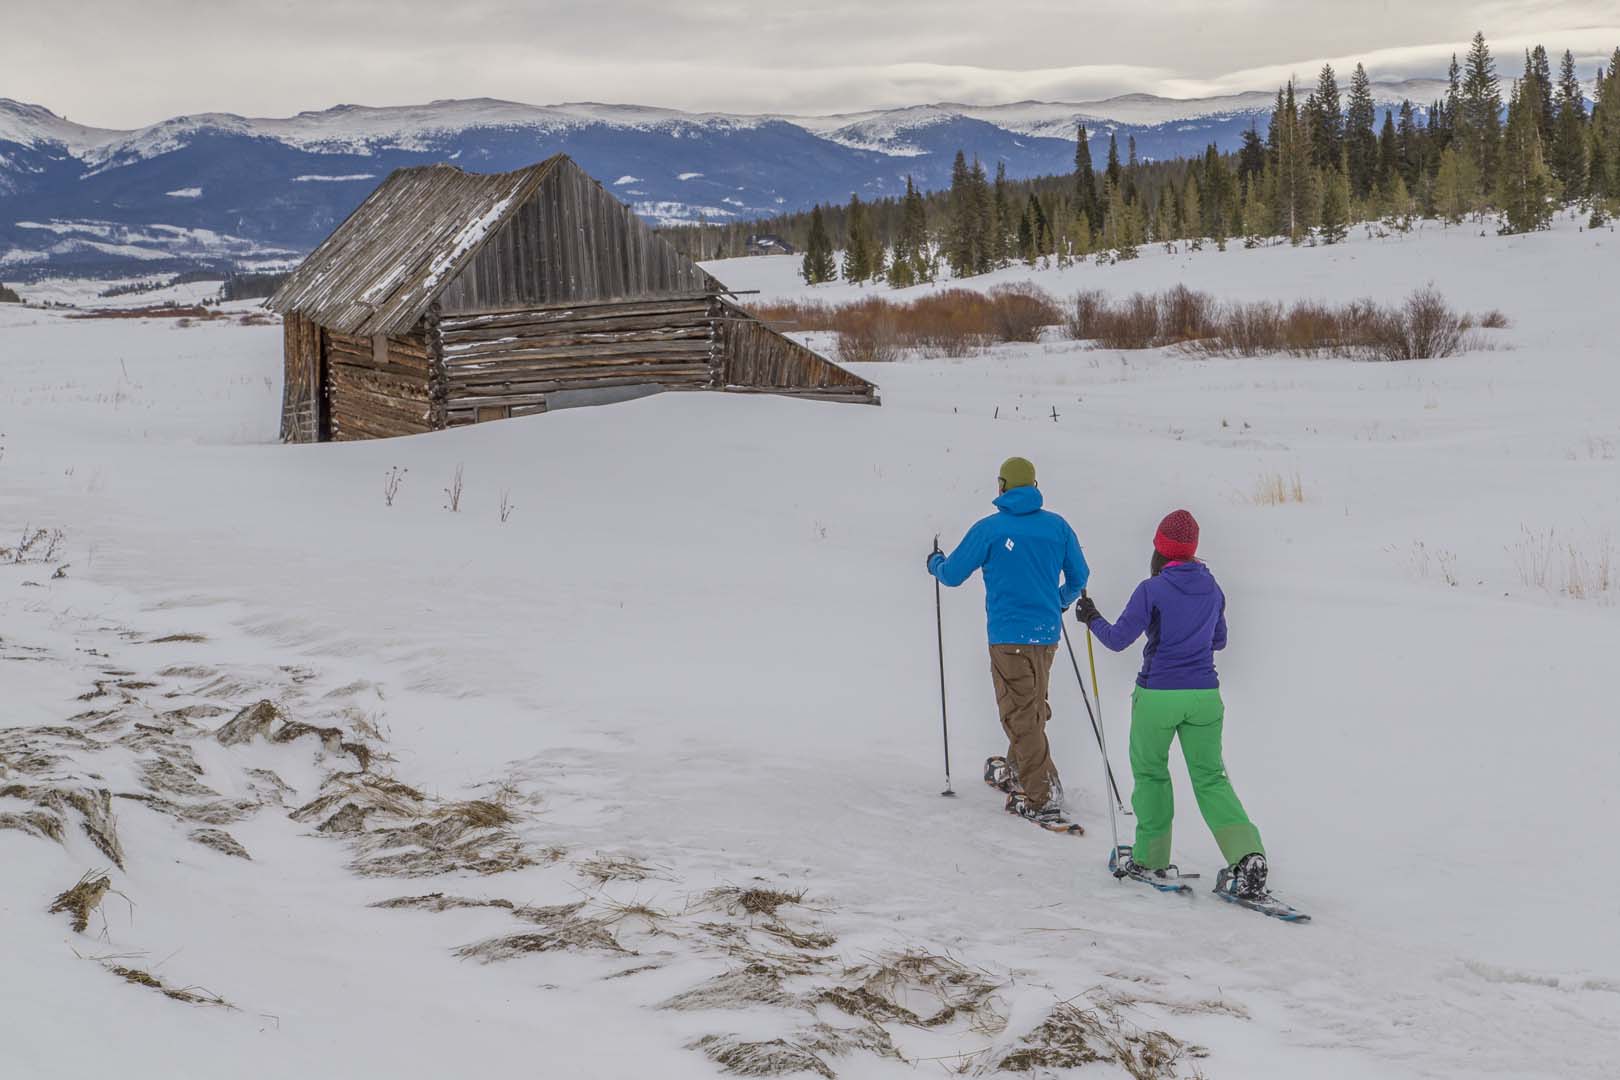 People cross country skiing near a cabin with mountains in background